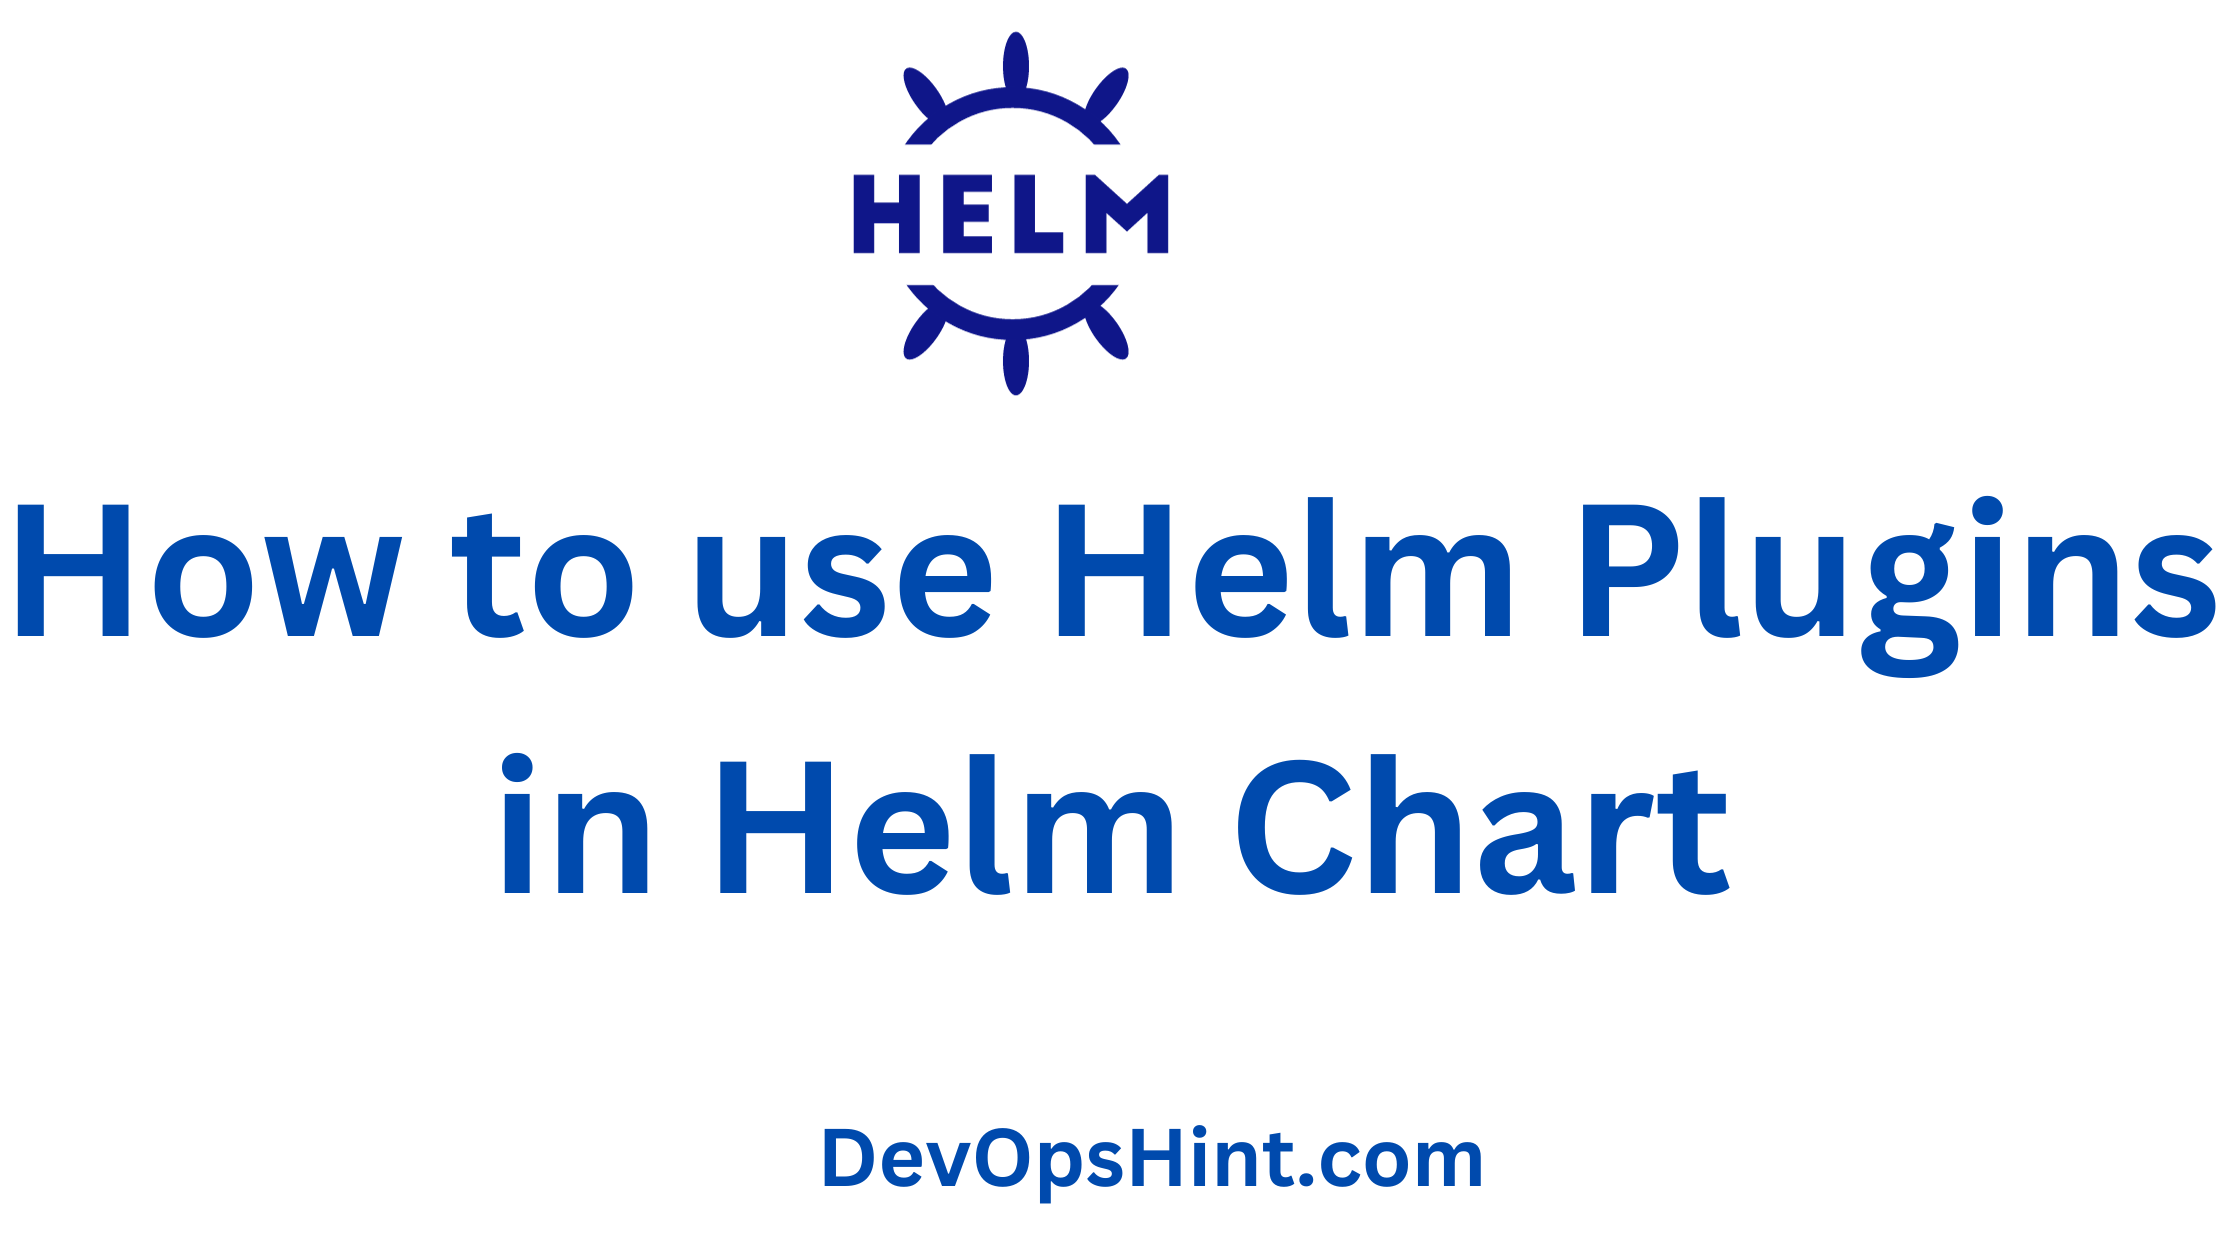 How to use Helm Plugins in Helm Chart